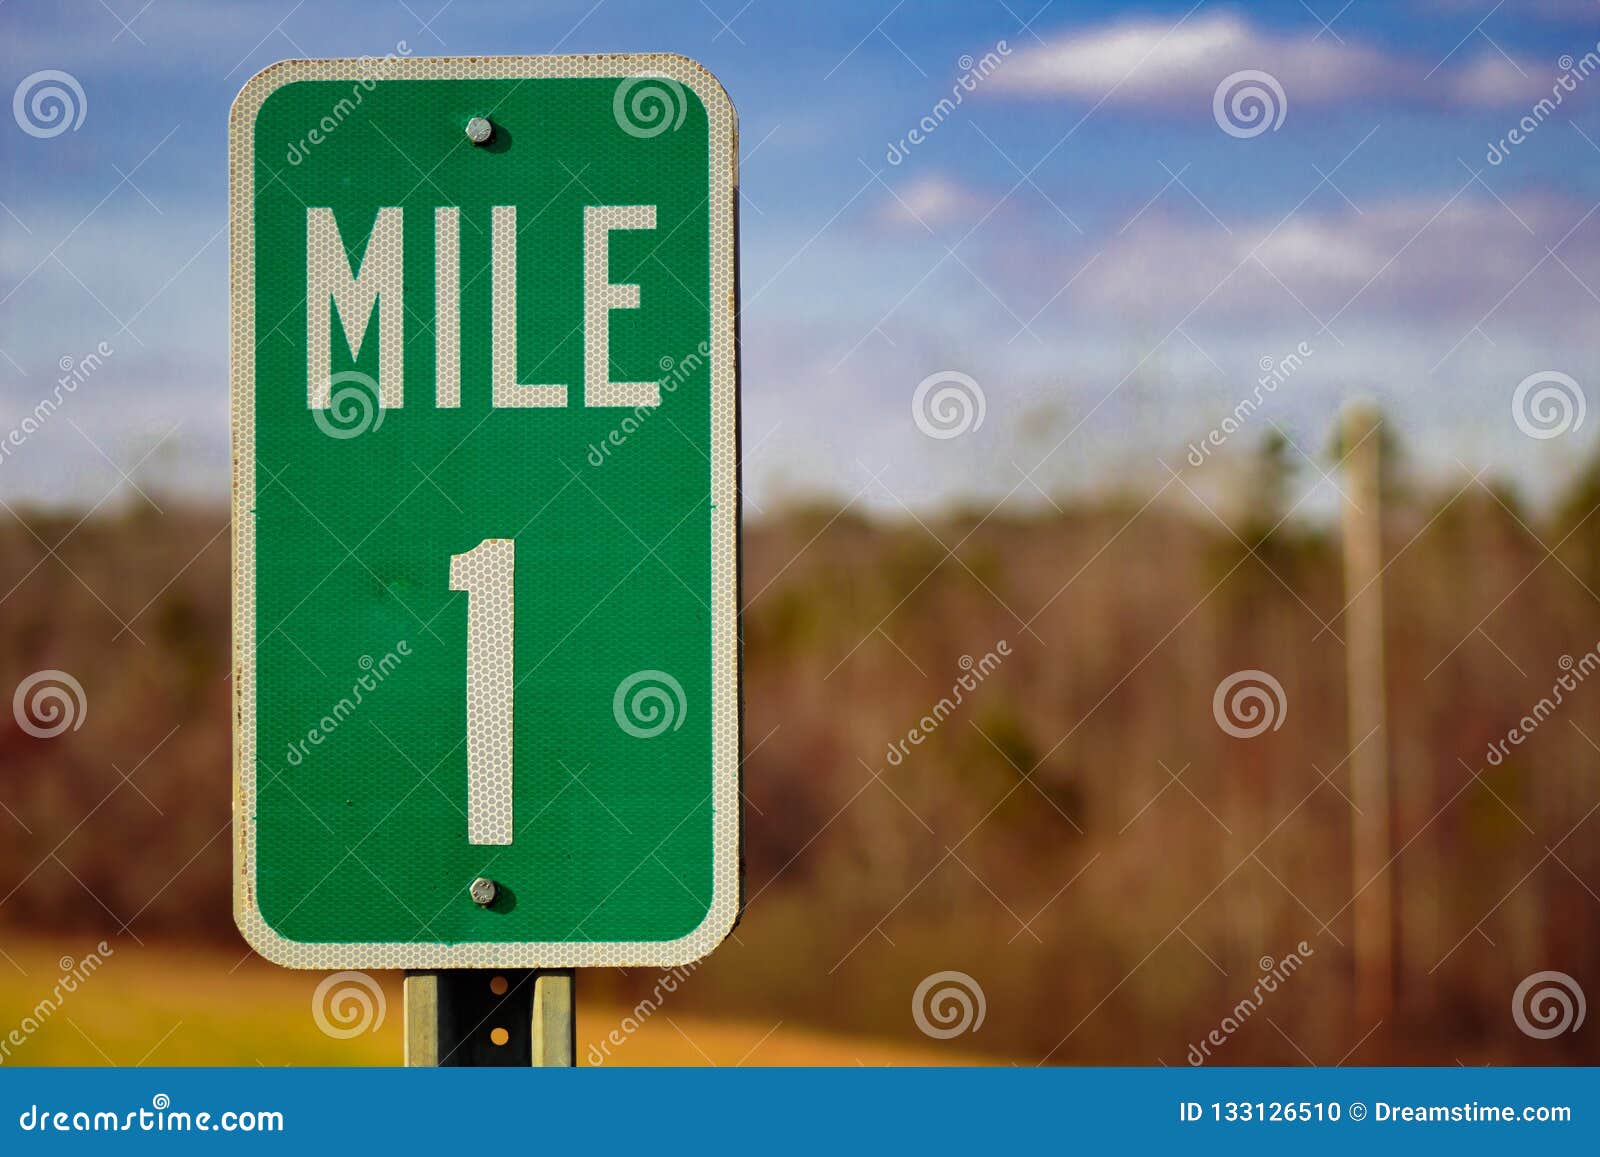 here is a 1 mile sign on the road